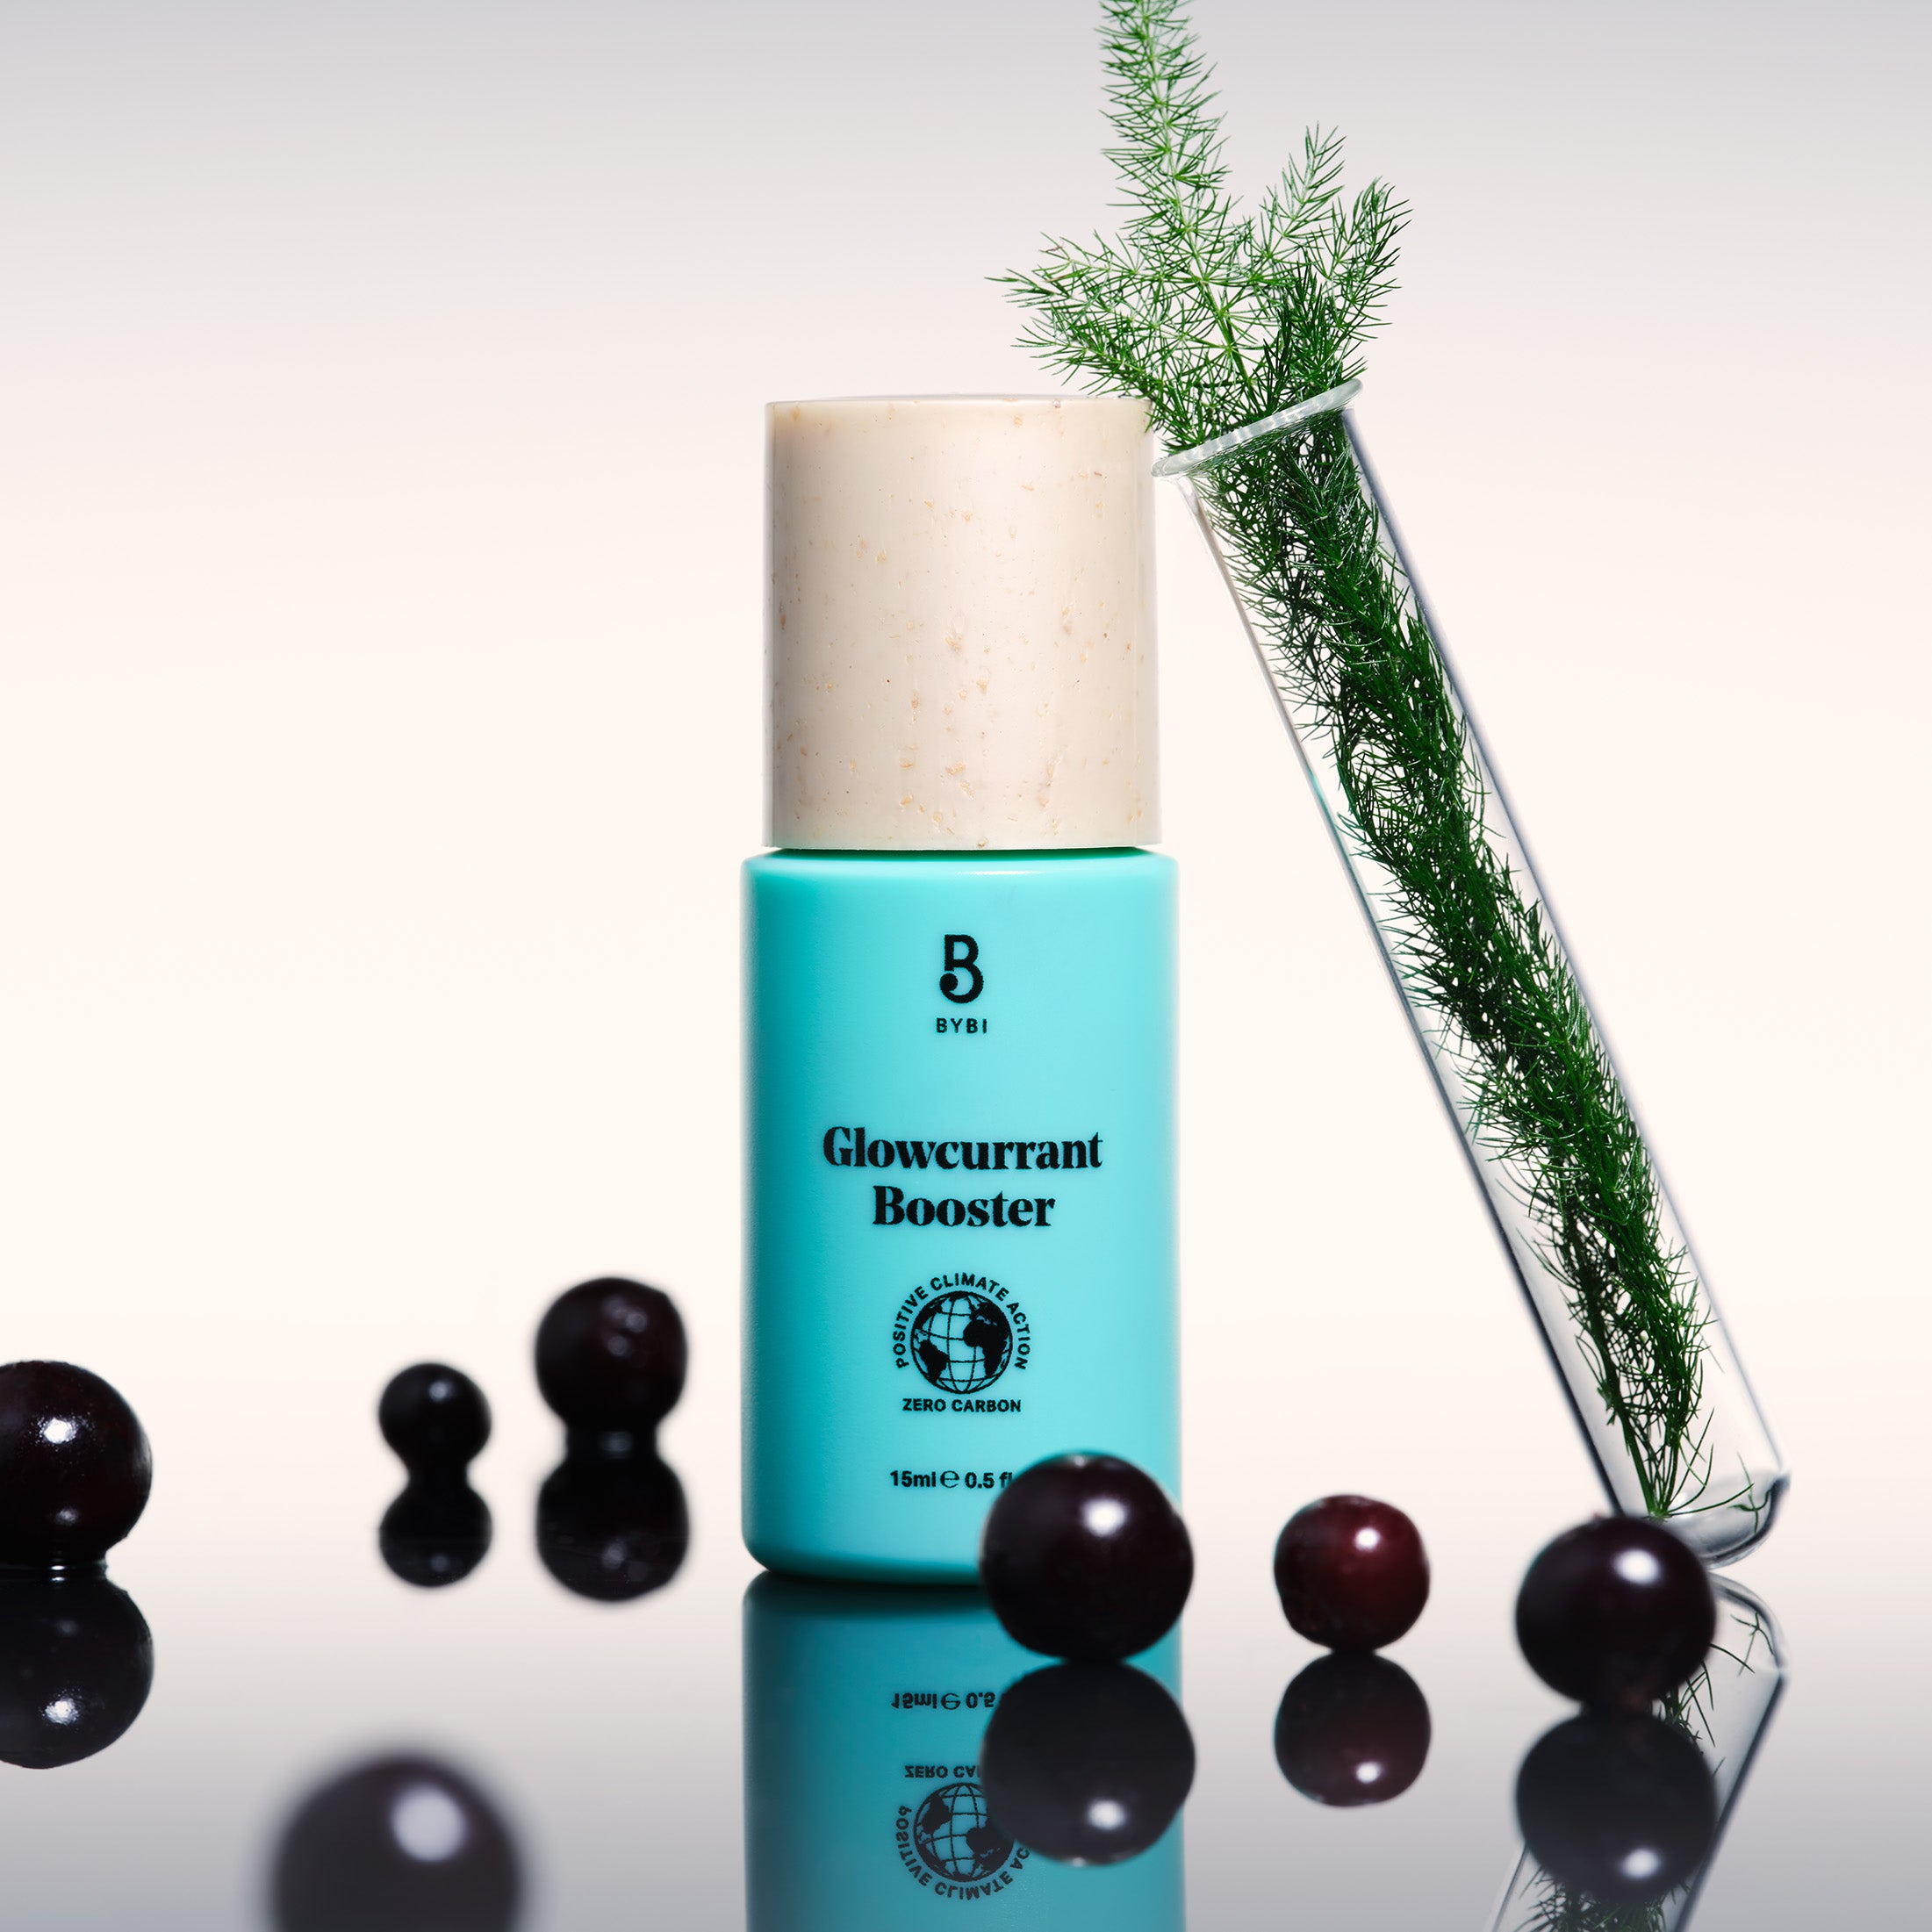 BYBI Beauty Glowcurrant Booster - Brightening Facial Oil at Socialite Beauty Canada